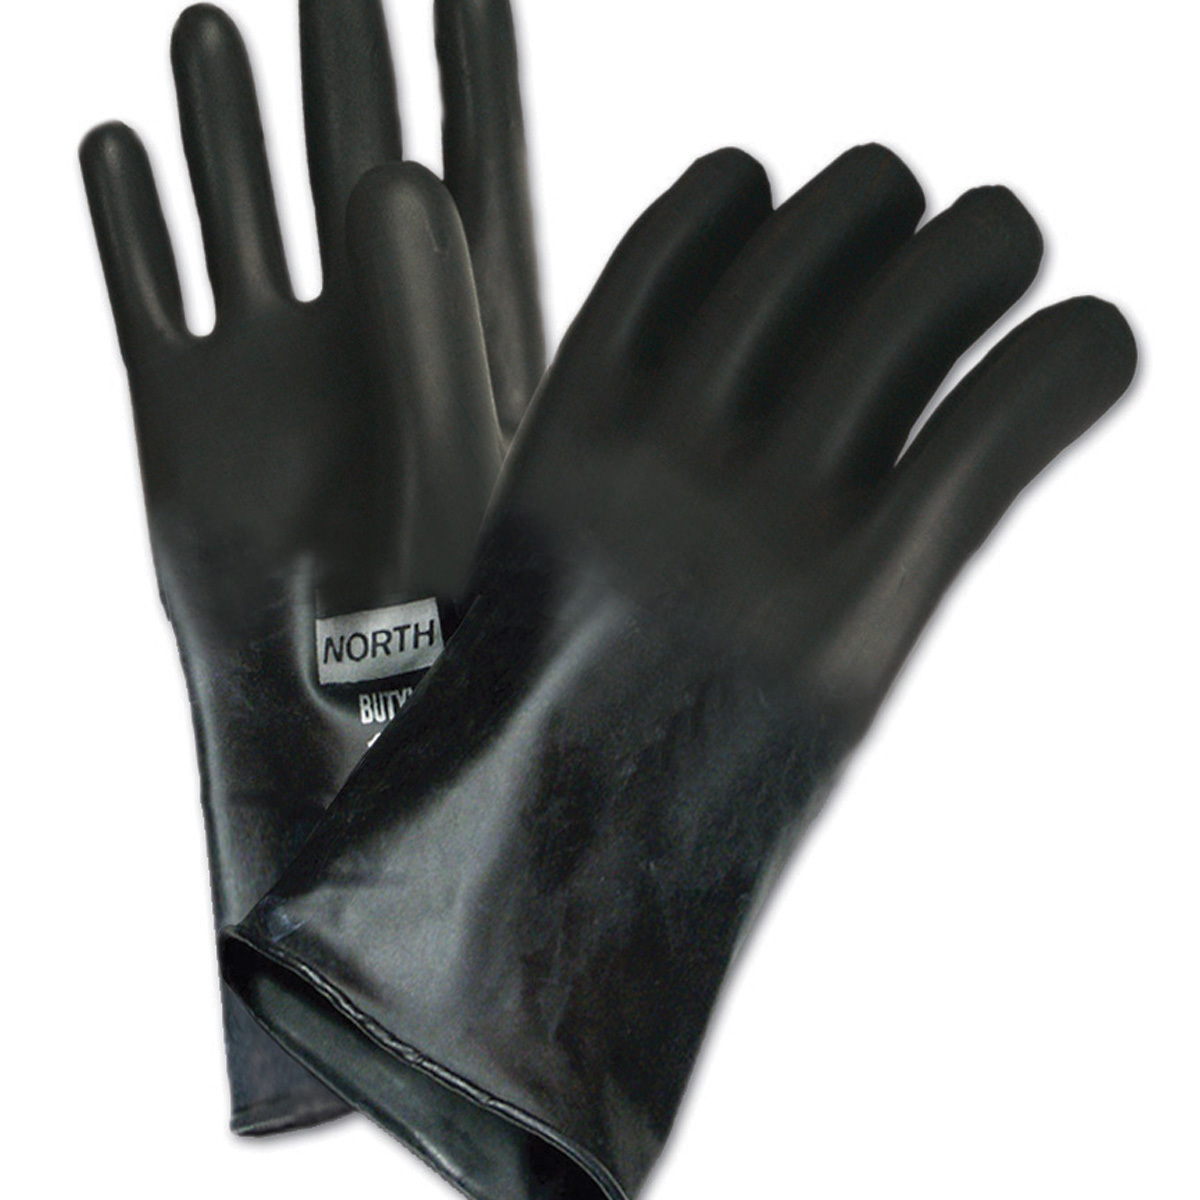 Honeywell Large Black North® Butyl 25 mil Unsupported Butyl Chemical Resistant Gloves